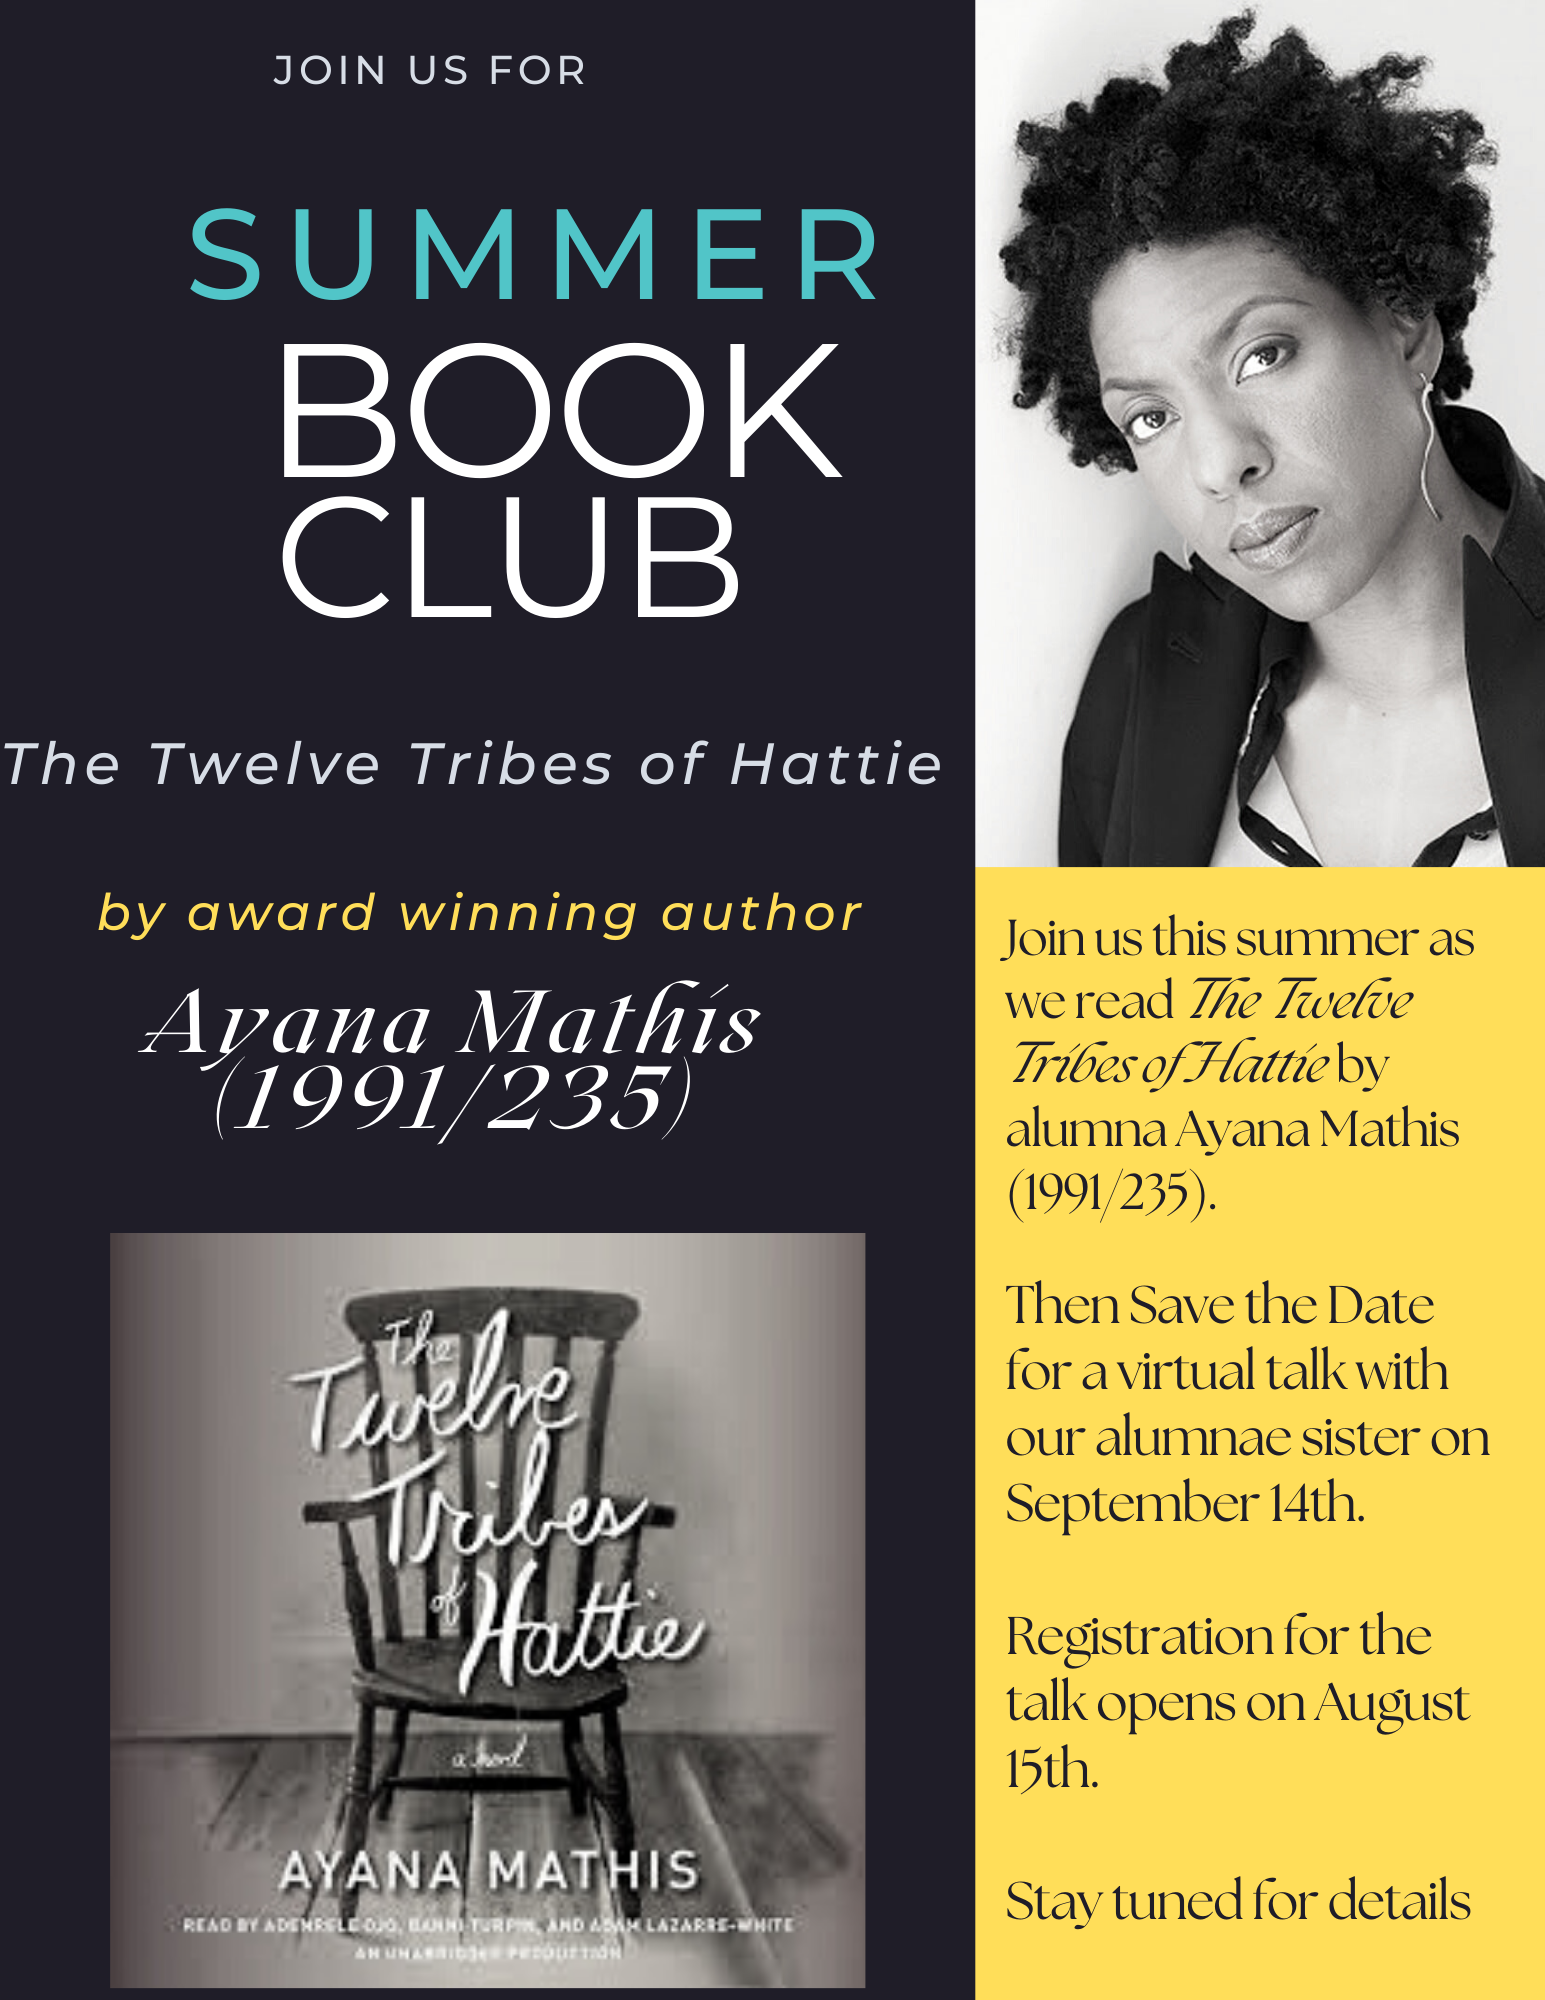 Summer Book Club in September 14th